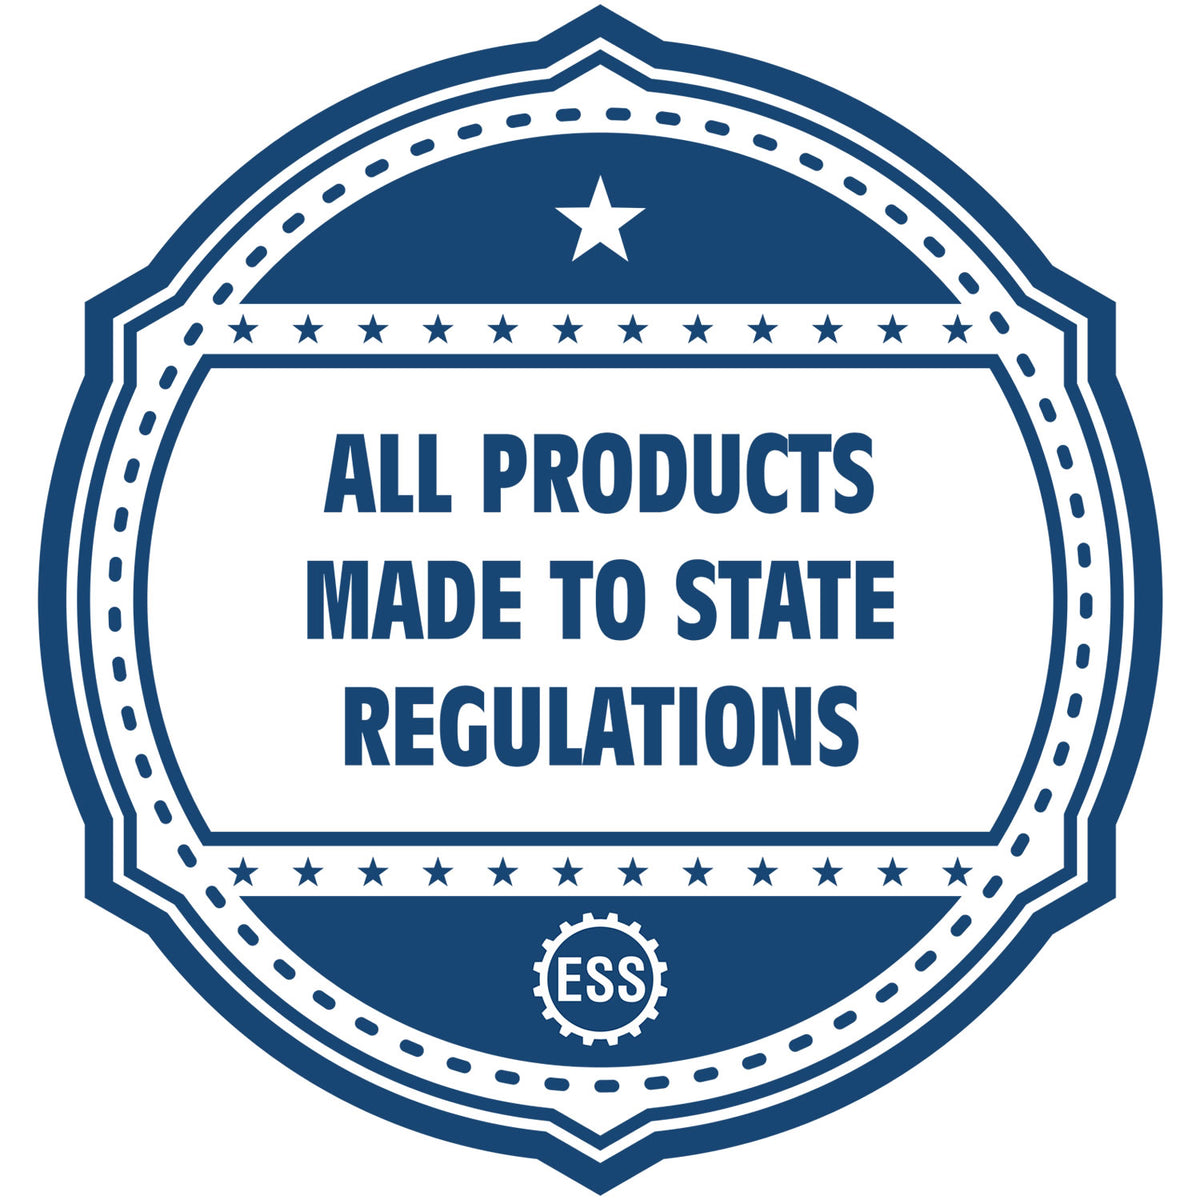 An icon or badge element for the Soft Wyoming Professional Engineer Seal showing that this product is made in compliance with state regulations.